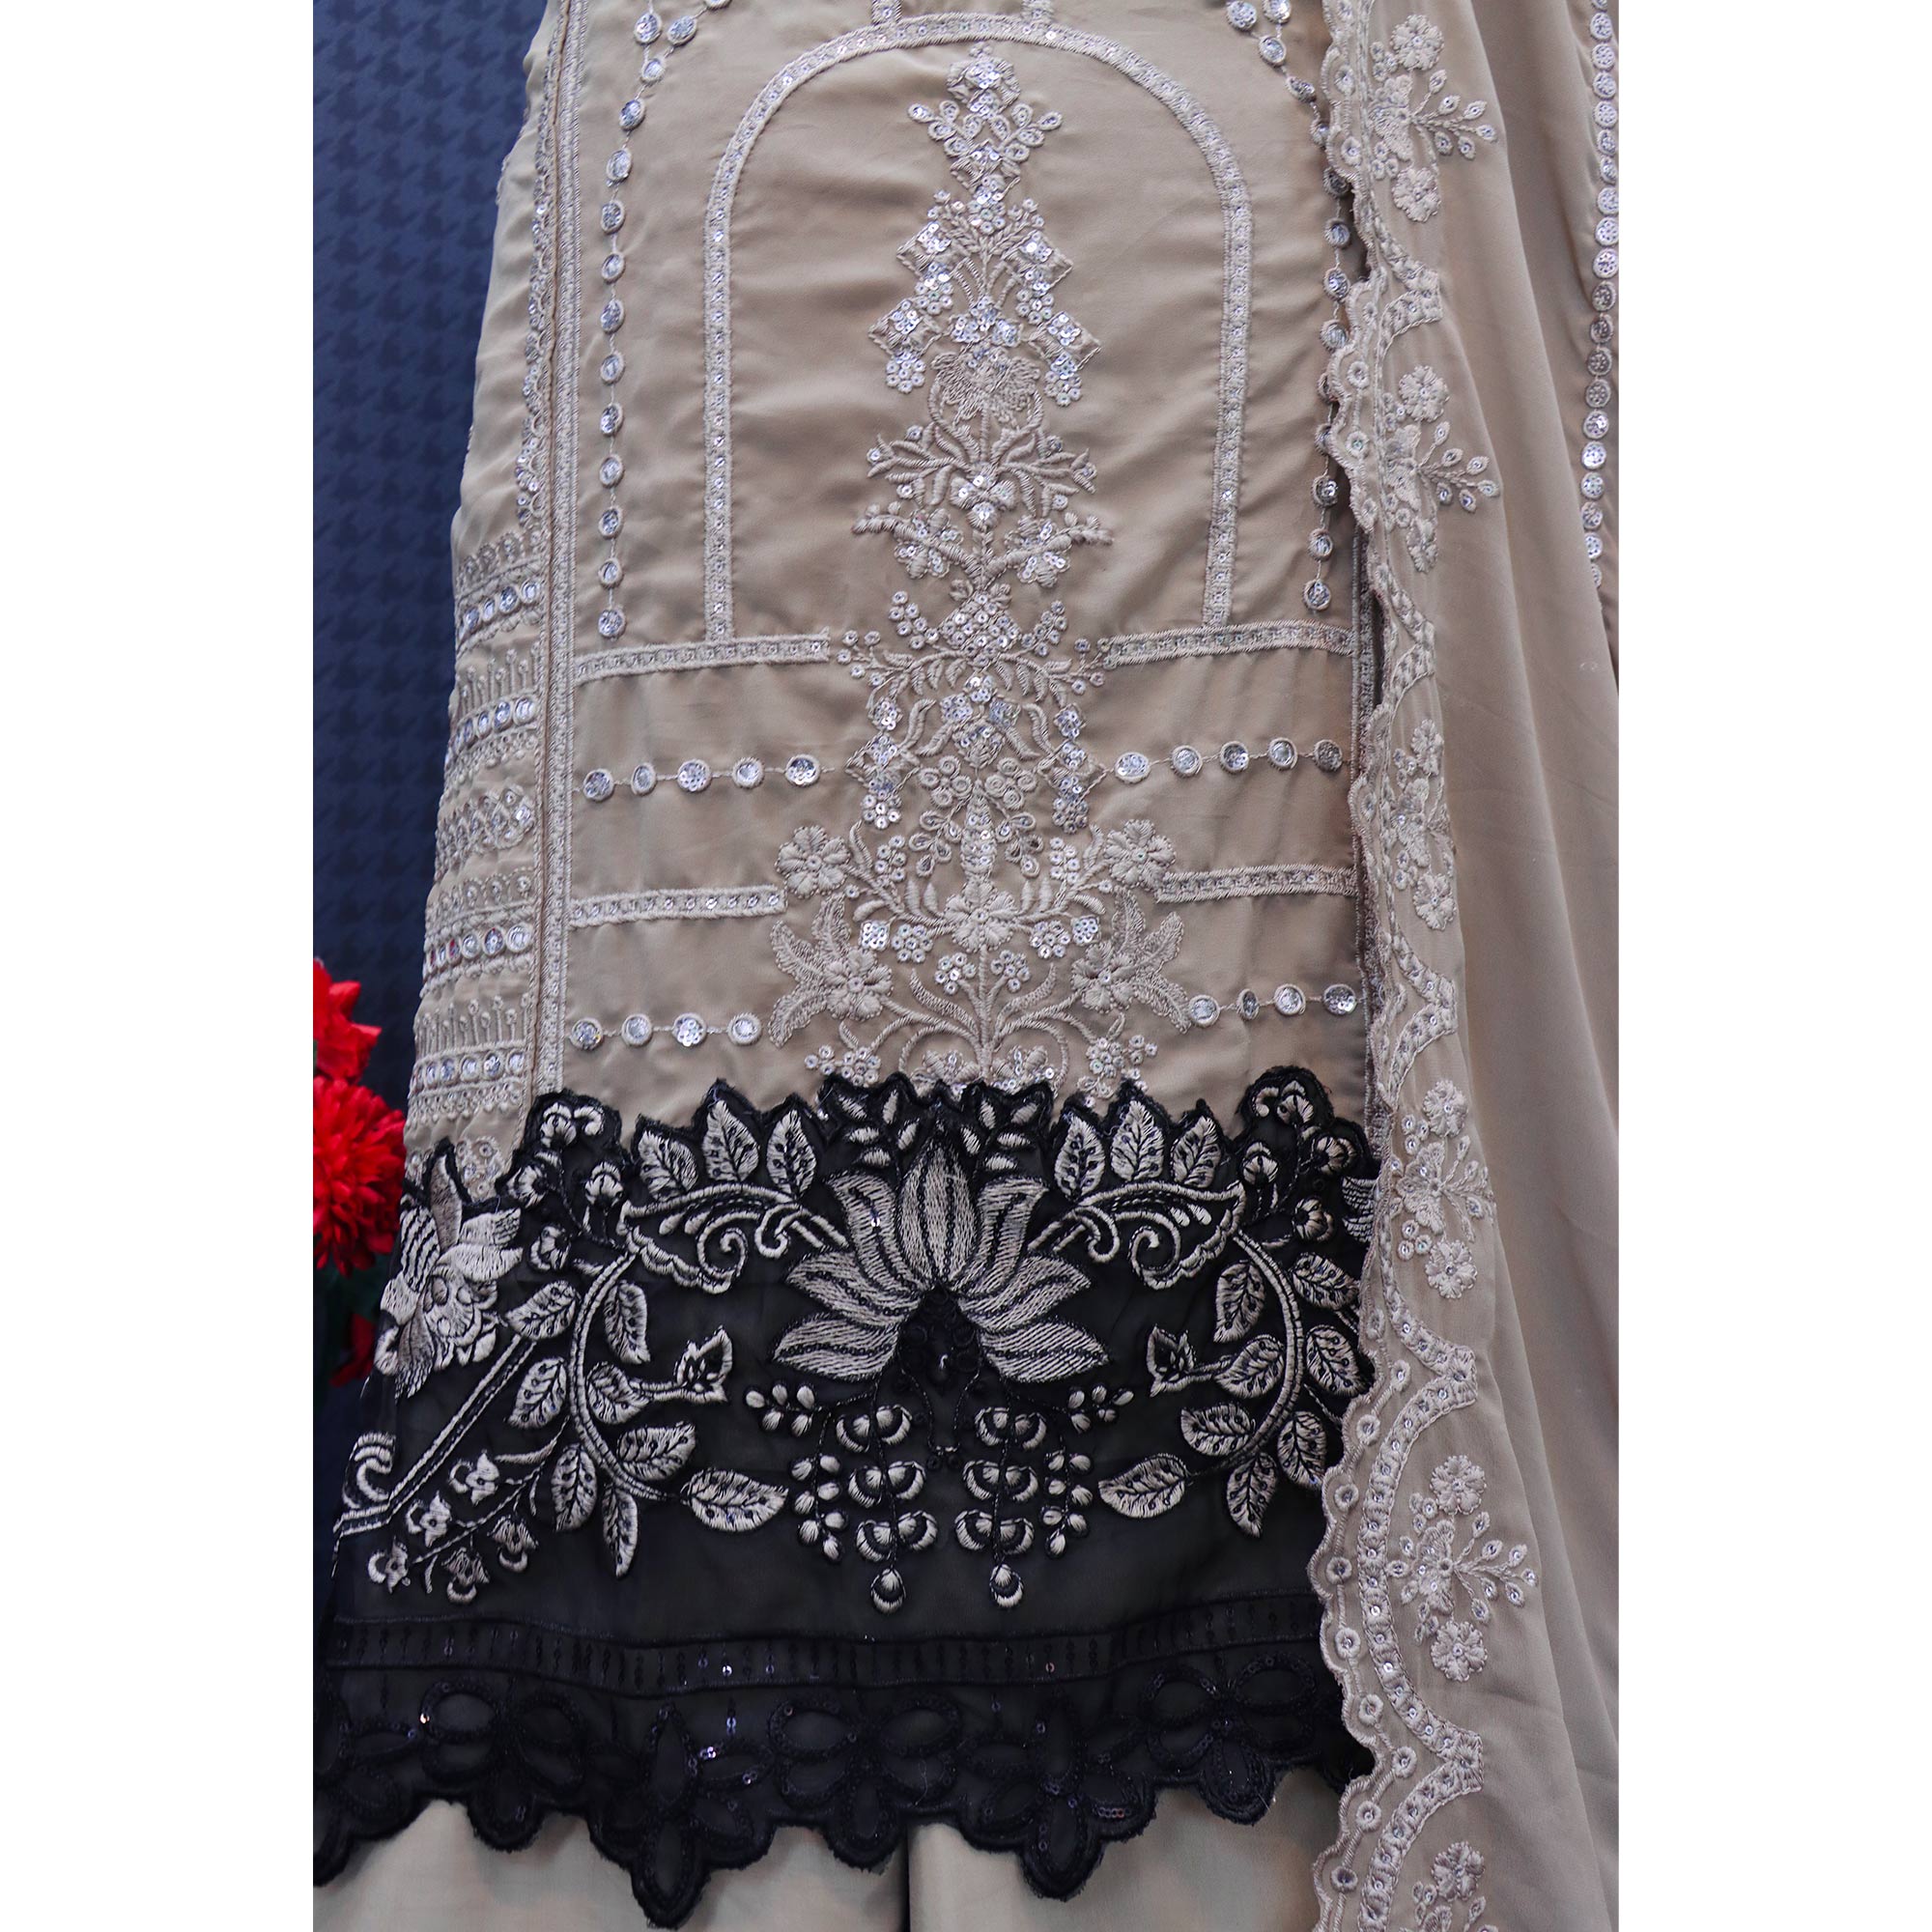 Beige Floral Embroidered Georgette Semi Stitched Pakistani Suit